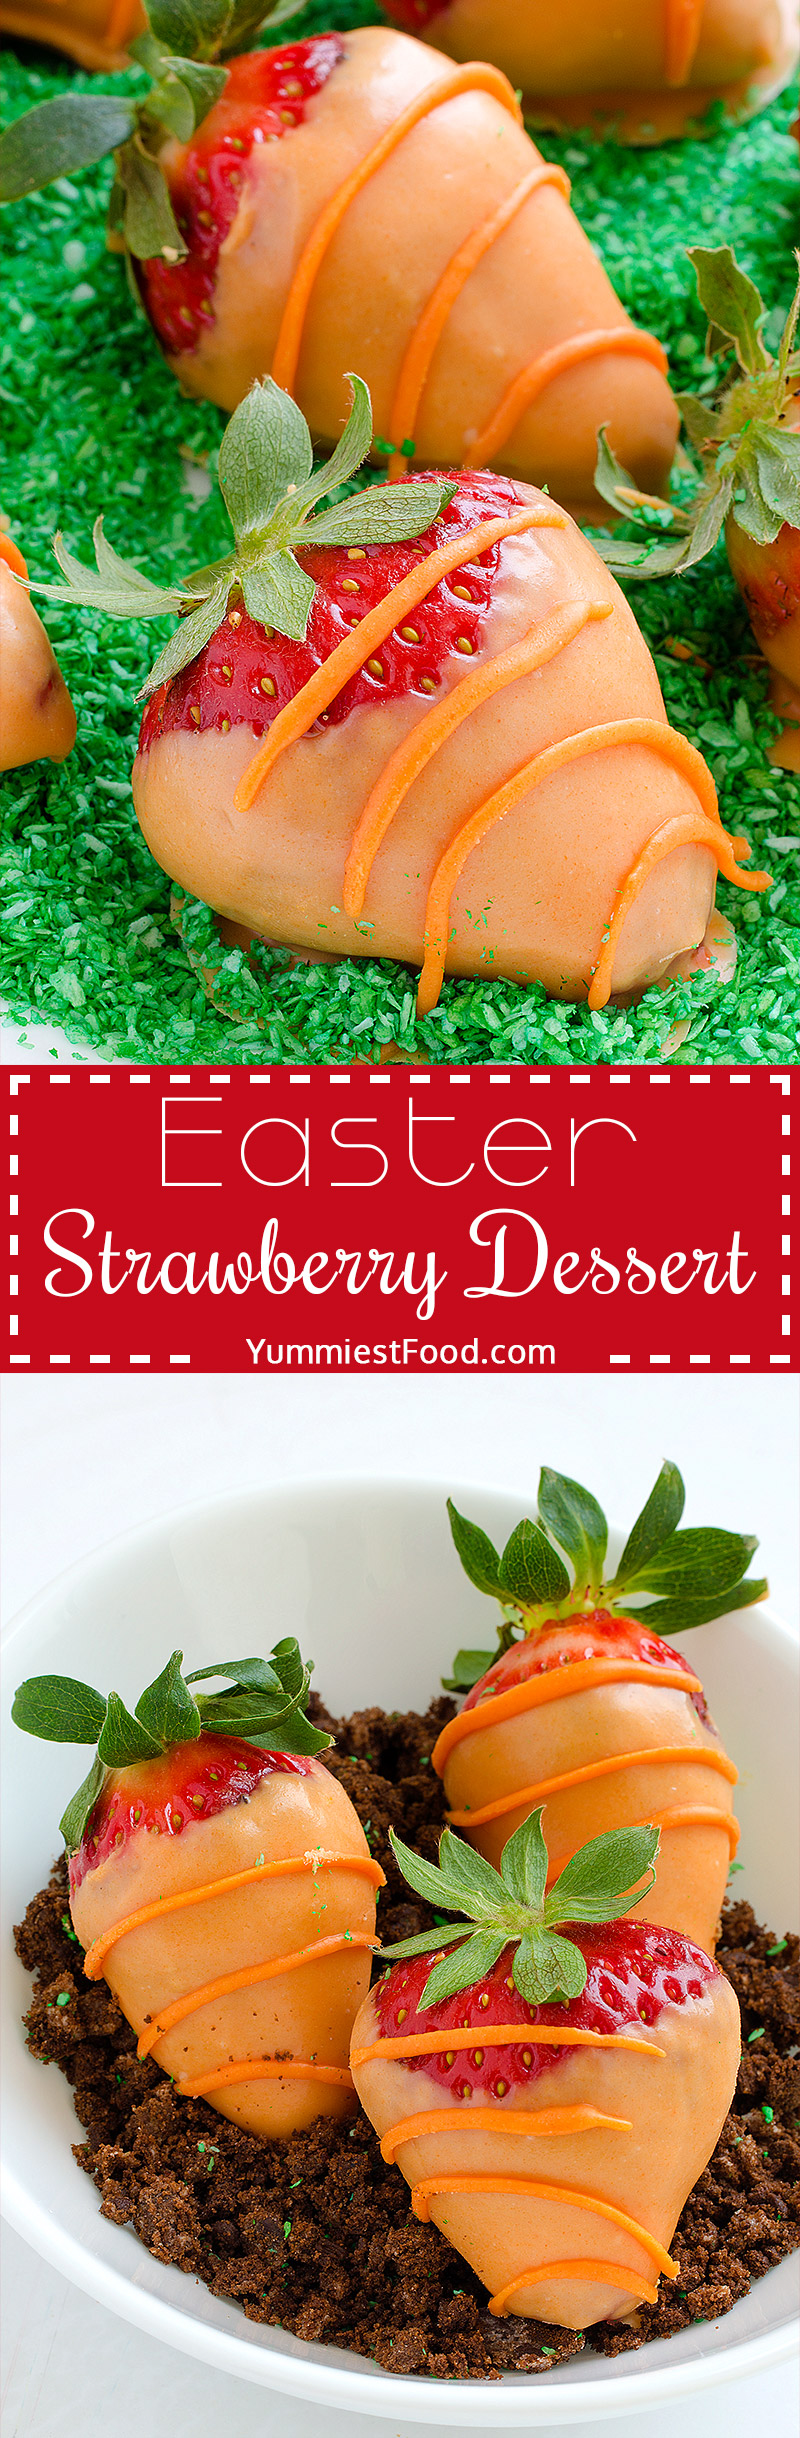 You only need a few ingredients for this Easter strawberry dessert, and your Easter family table will look incredible and full of imagination with this strawberry dessert